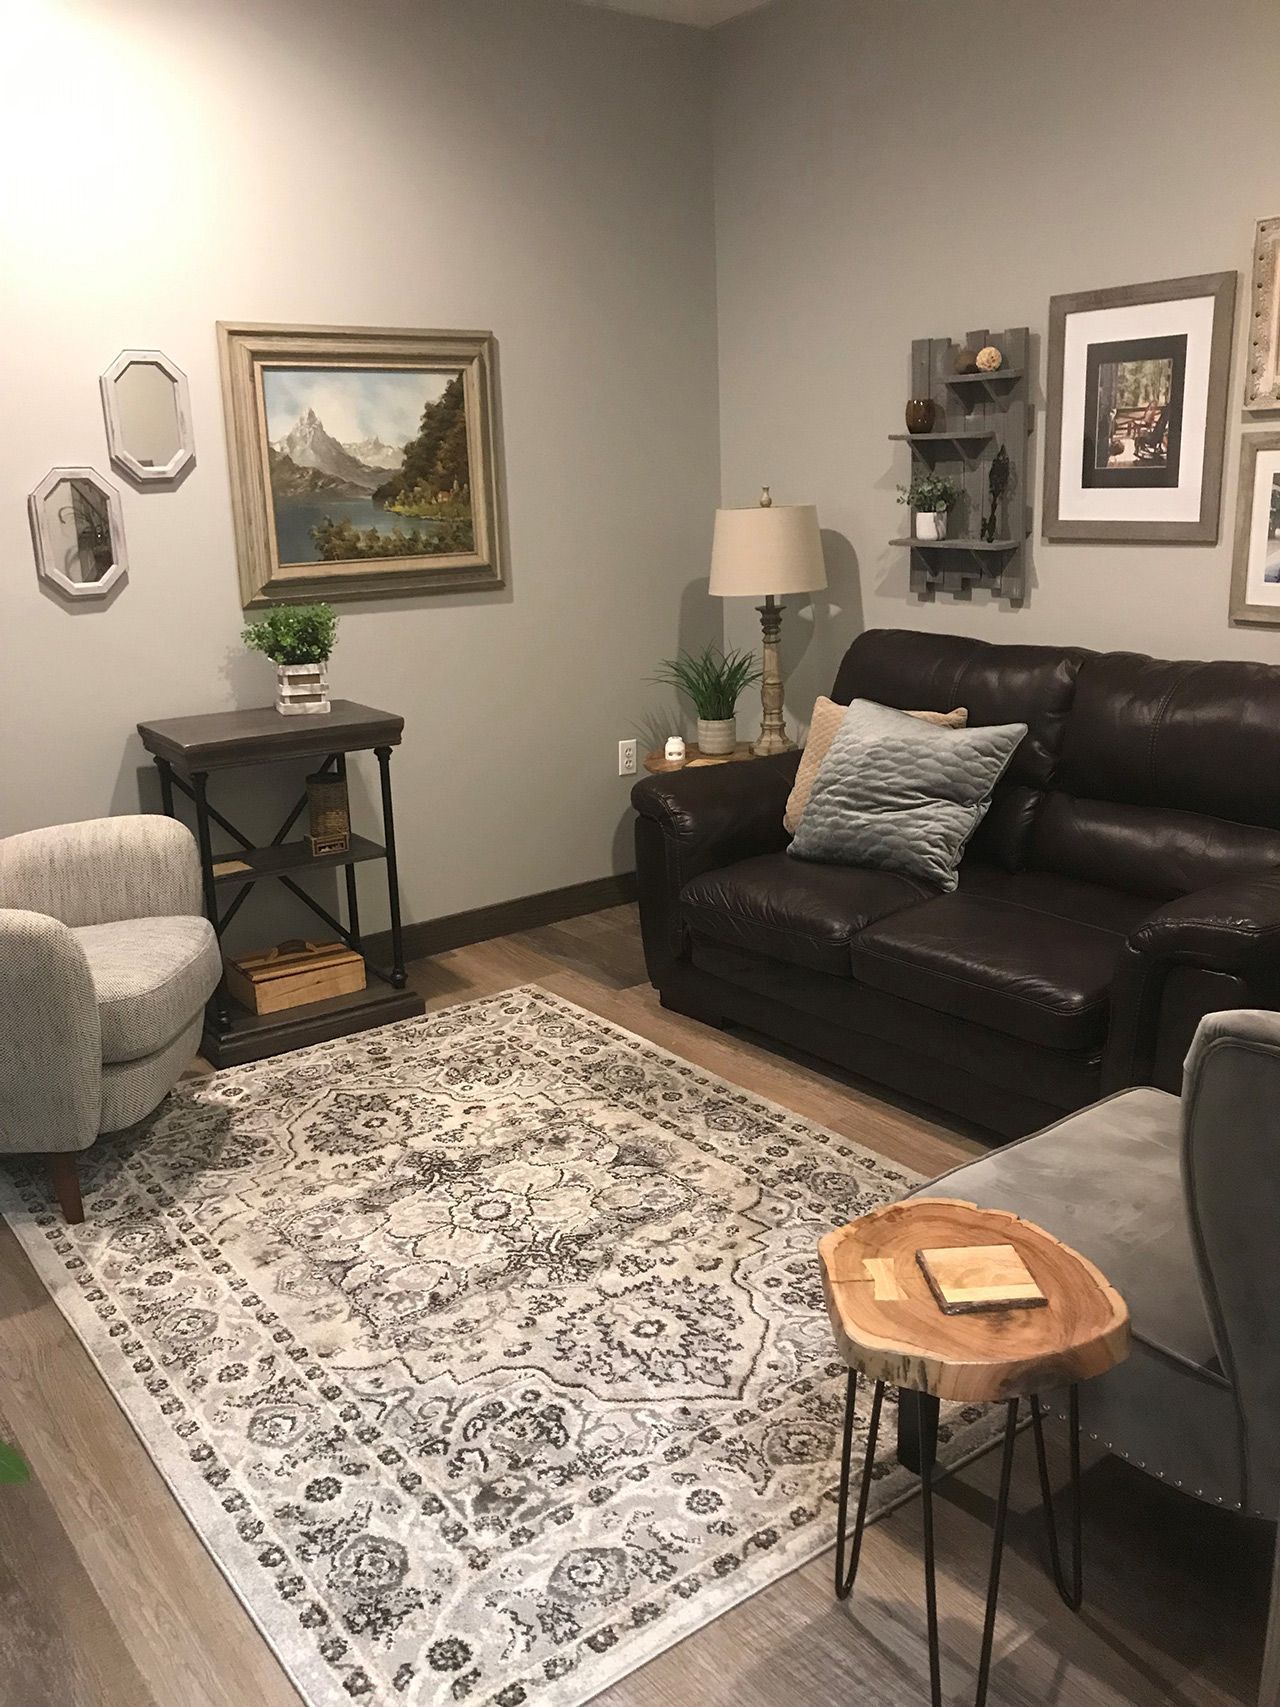 Gallery Photo of Therapy room